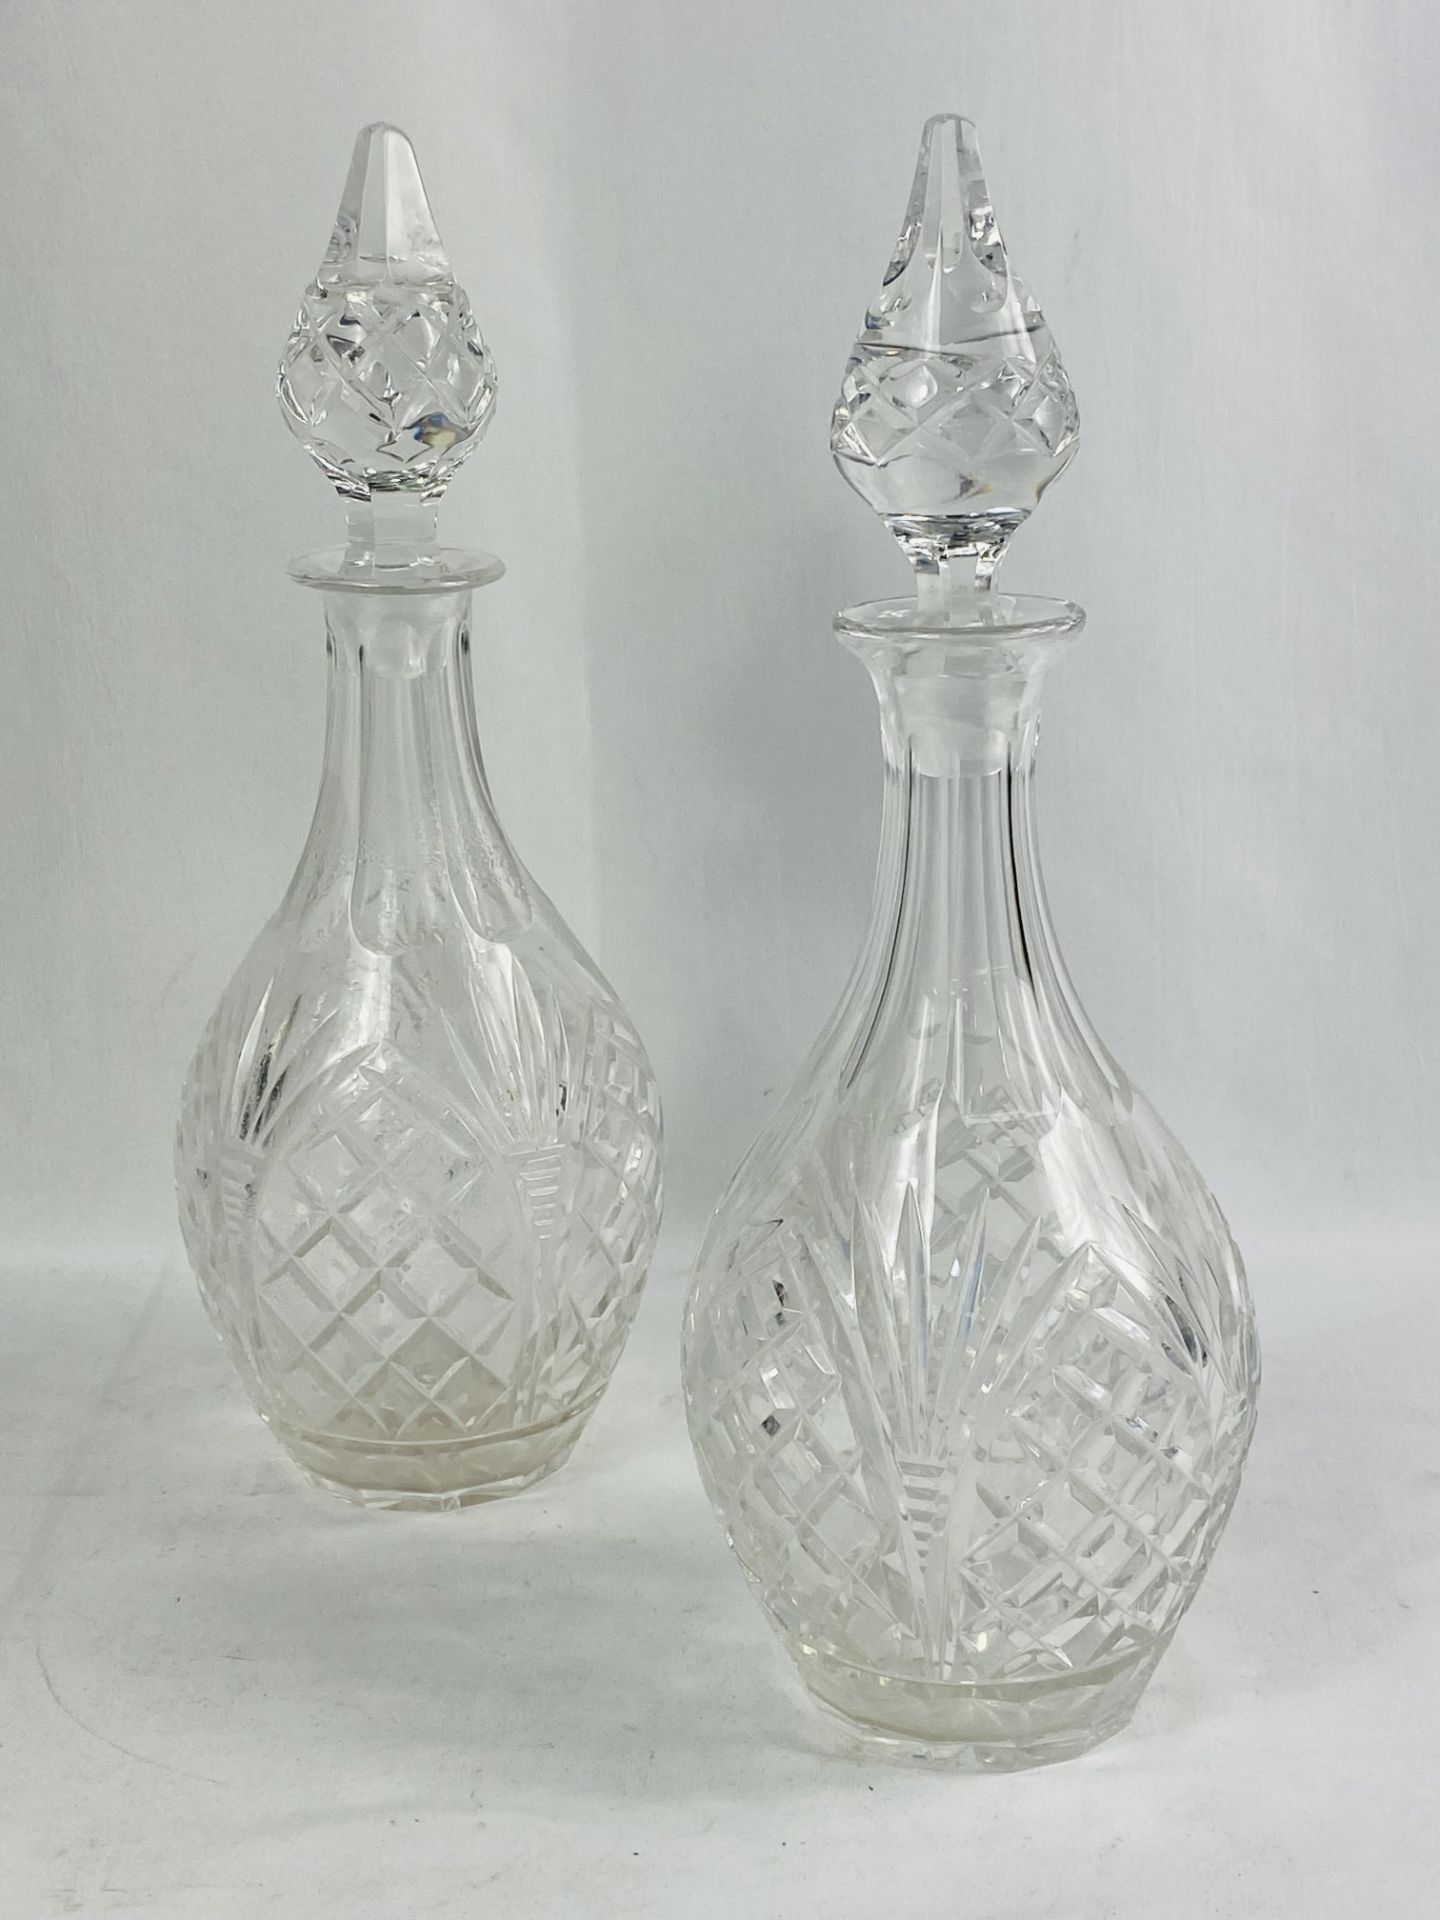 Four cut glass decanters - Image 4 of 5